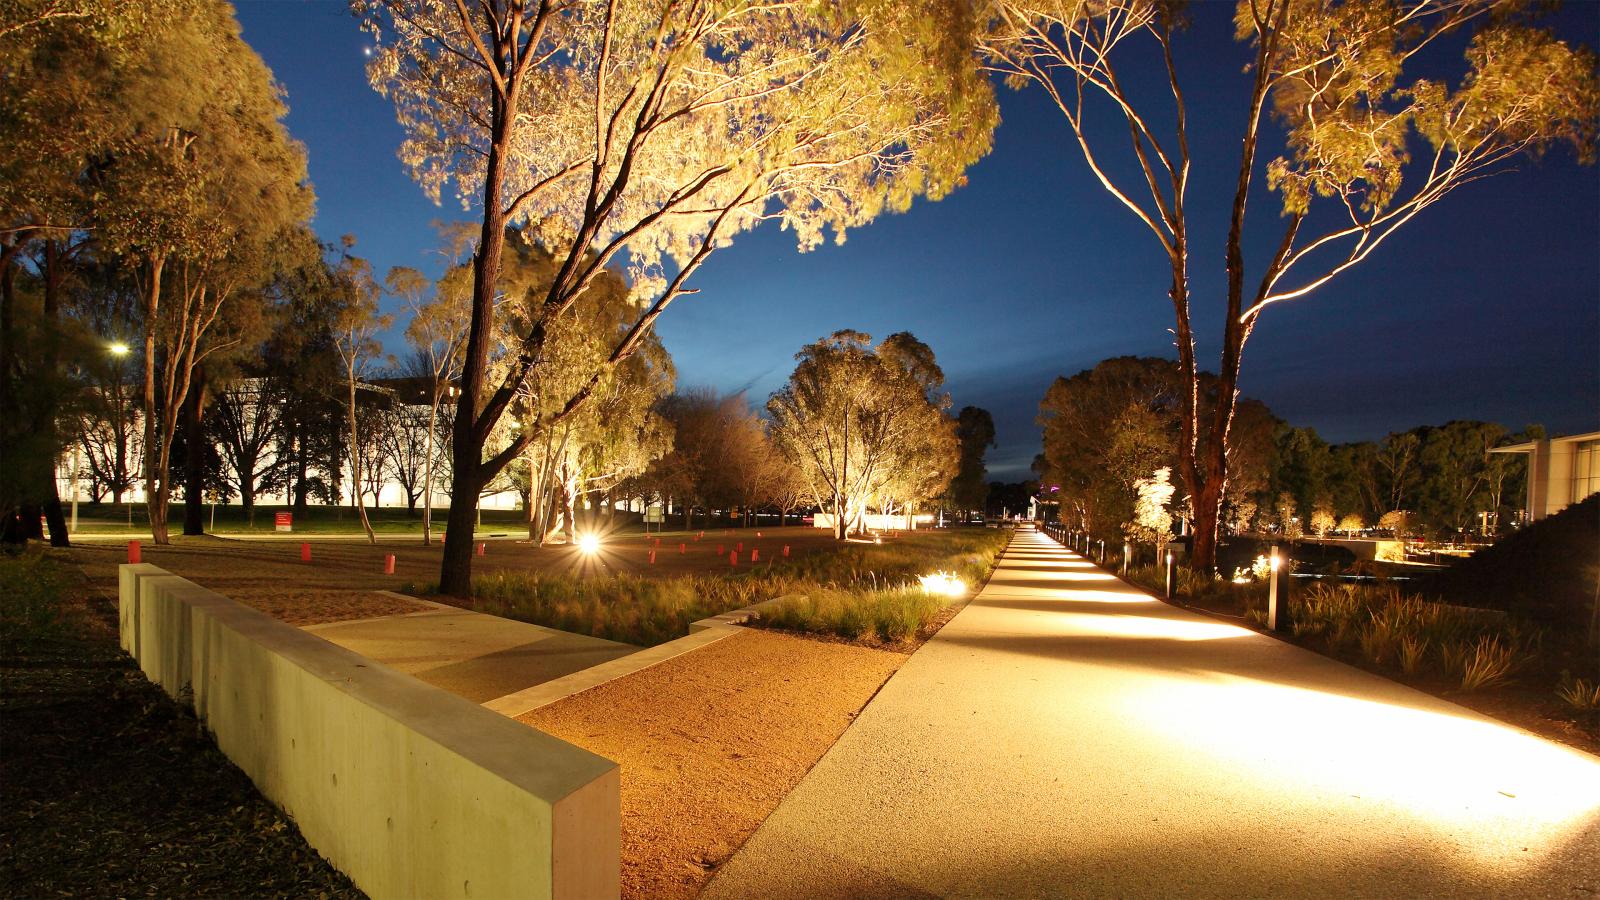 A well-lit pathway through an Australian park at twilight, with tall trees accentuated by the soft glow of surrounding lights. The sky is deep blue, indicating the transition from day to night. The path leads into the distance, flanked by lush garden vegetation.